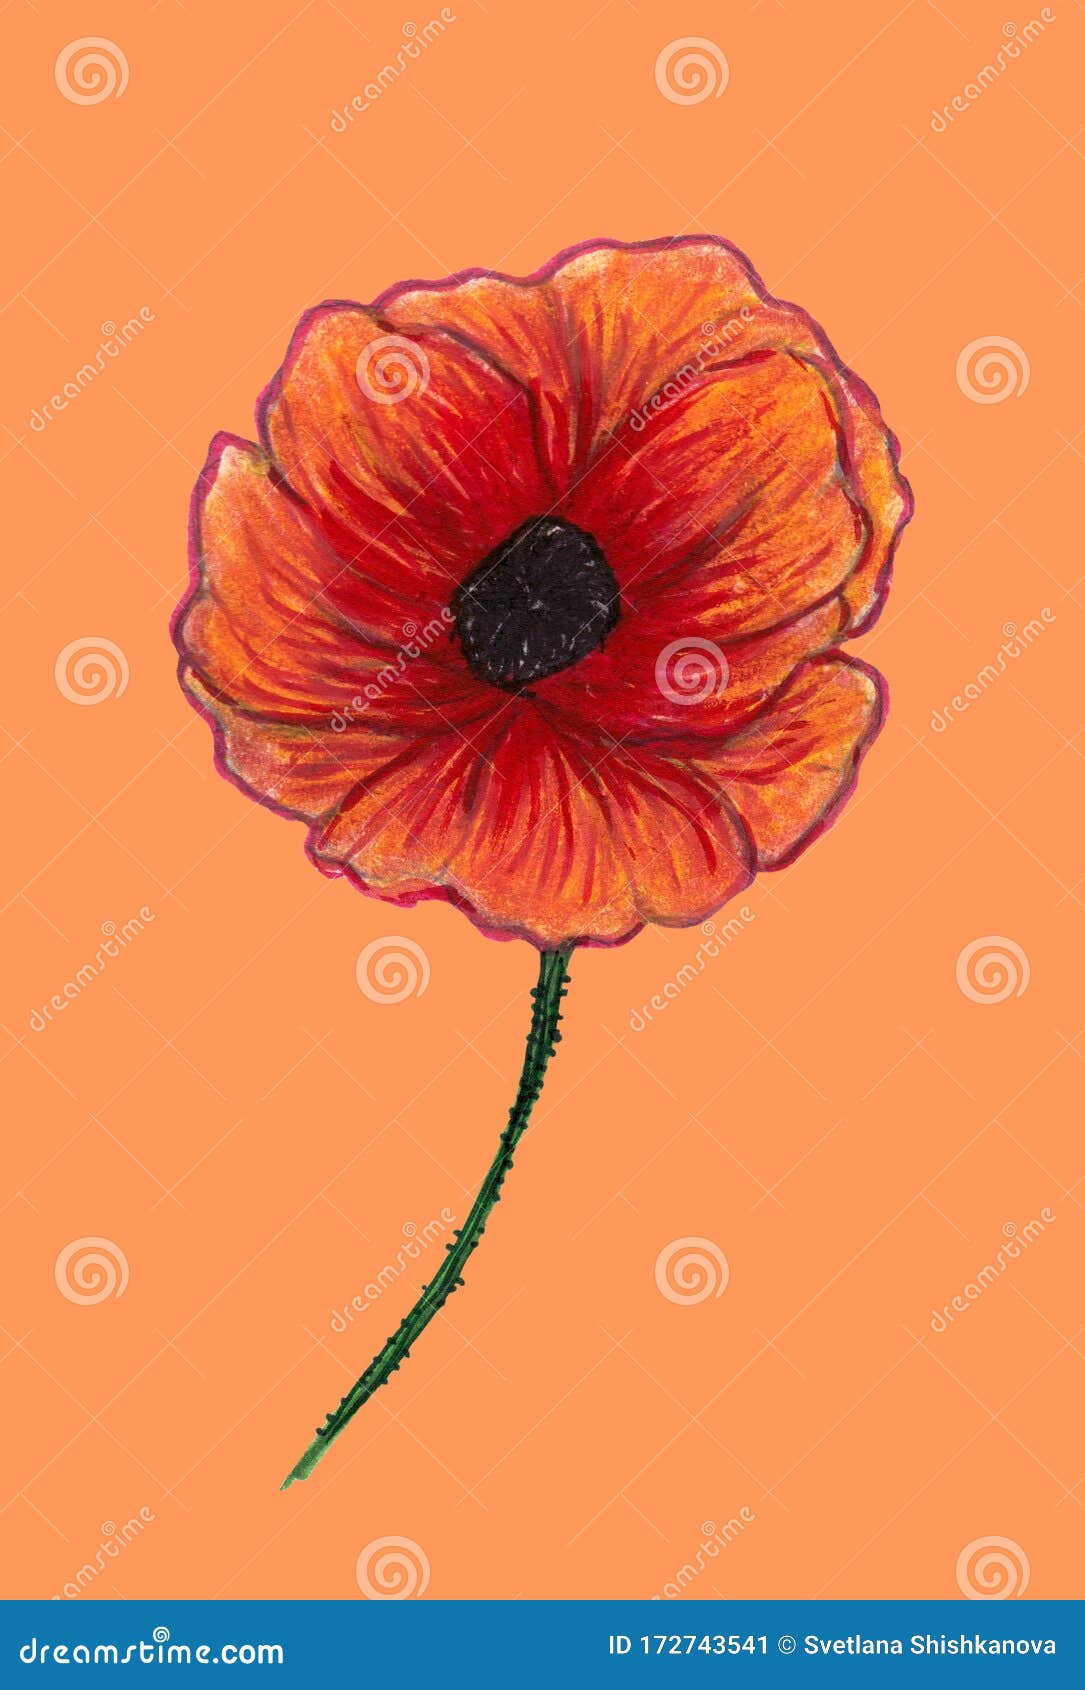 Bright Red Poppy Isolated On Light Background Beautiful Flower Pencil Drawing Hand Drawn Illustration Stock Illustration Illustration Of Blossom Background